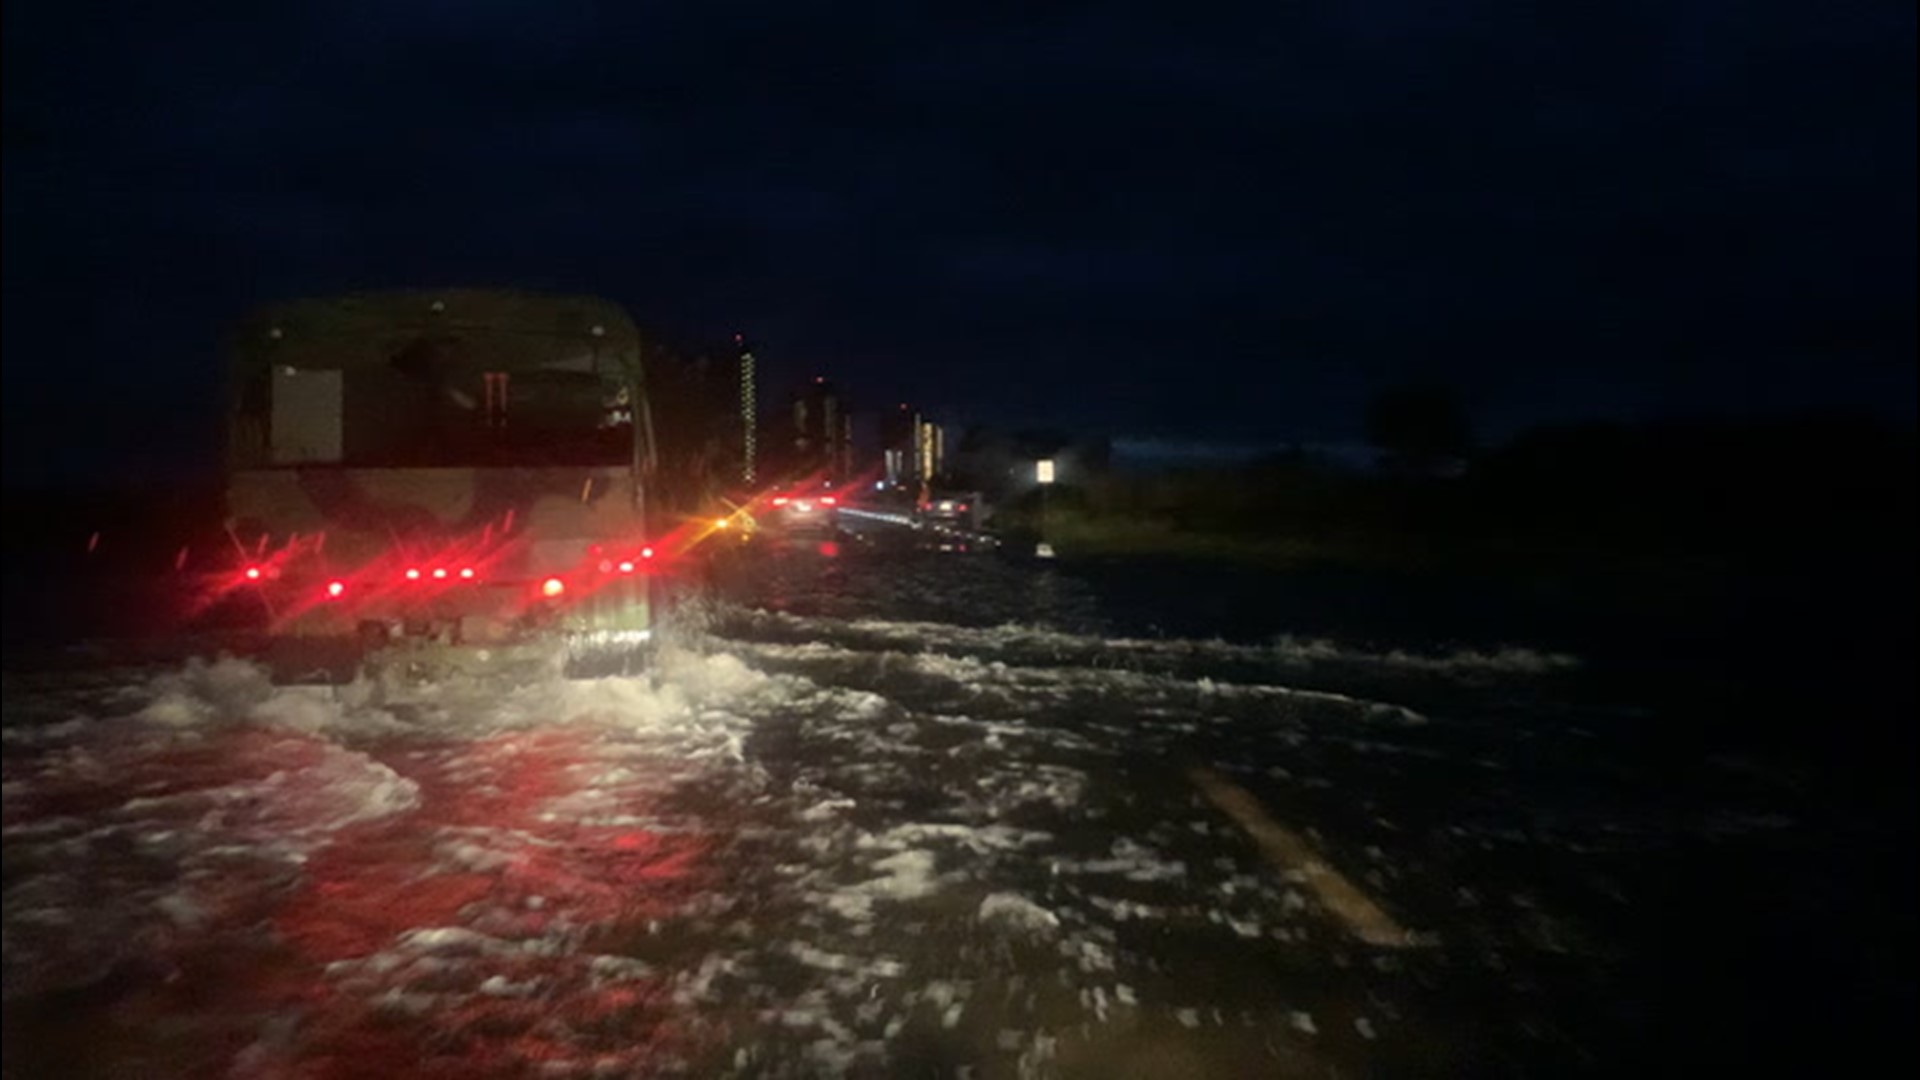 High water rescue vehicles were out in Gulf Shores, Alabama, on Wednesday night, Sept. 16, checking on drivers stuck on, or waiting at, flooded roadways.